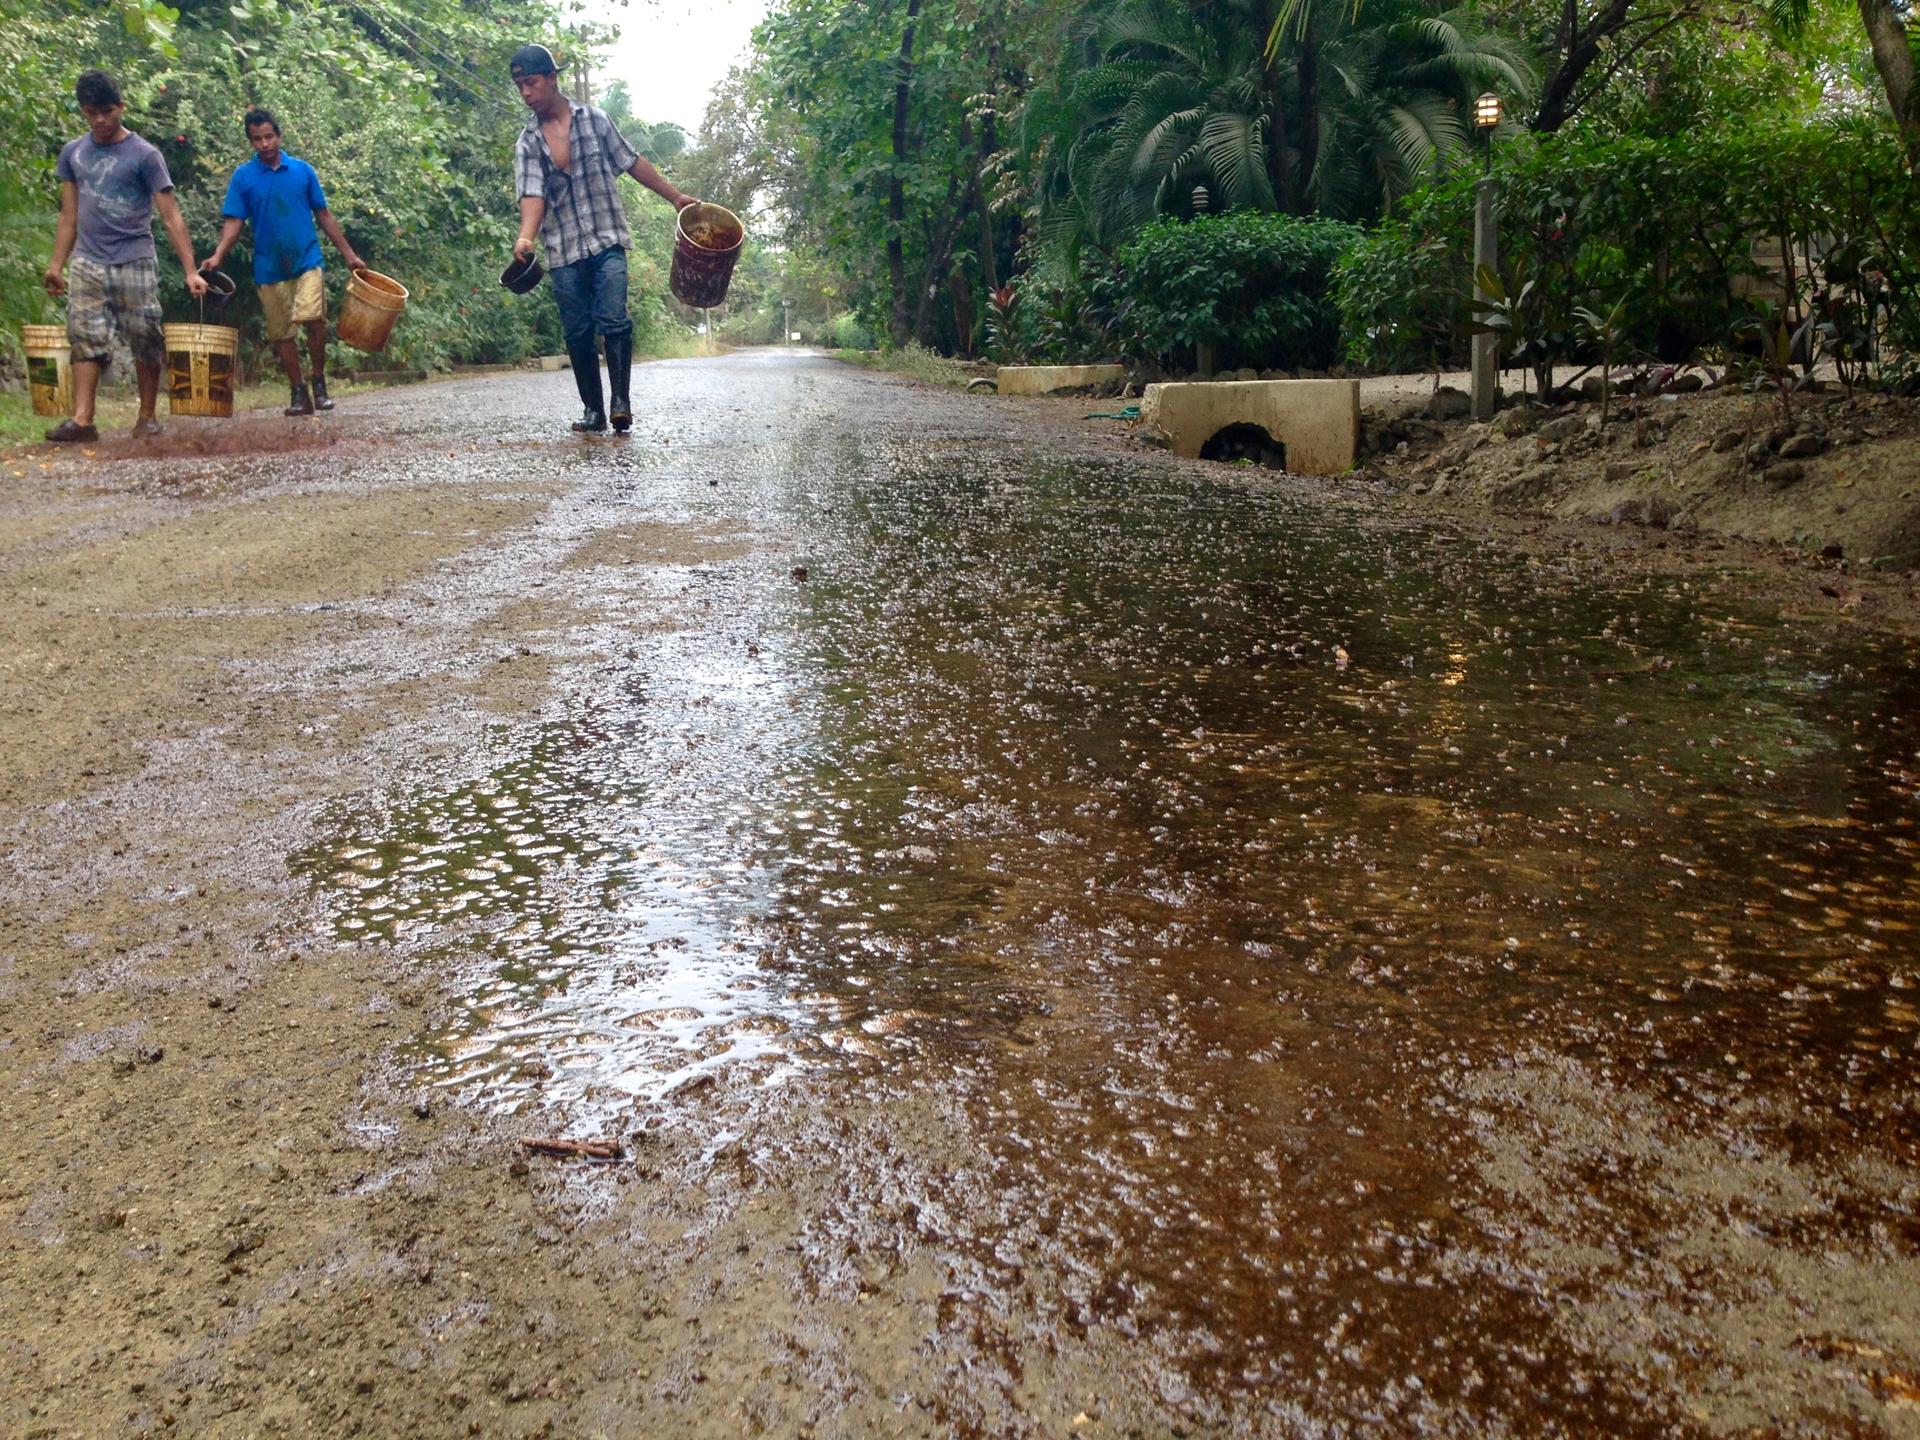 Workers pour molasses onto a road in Playa Guiones.